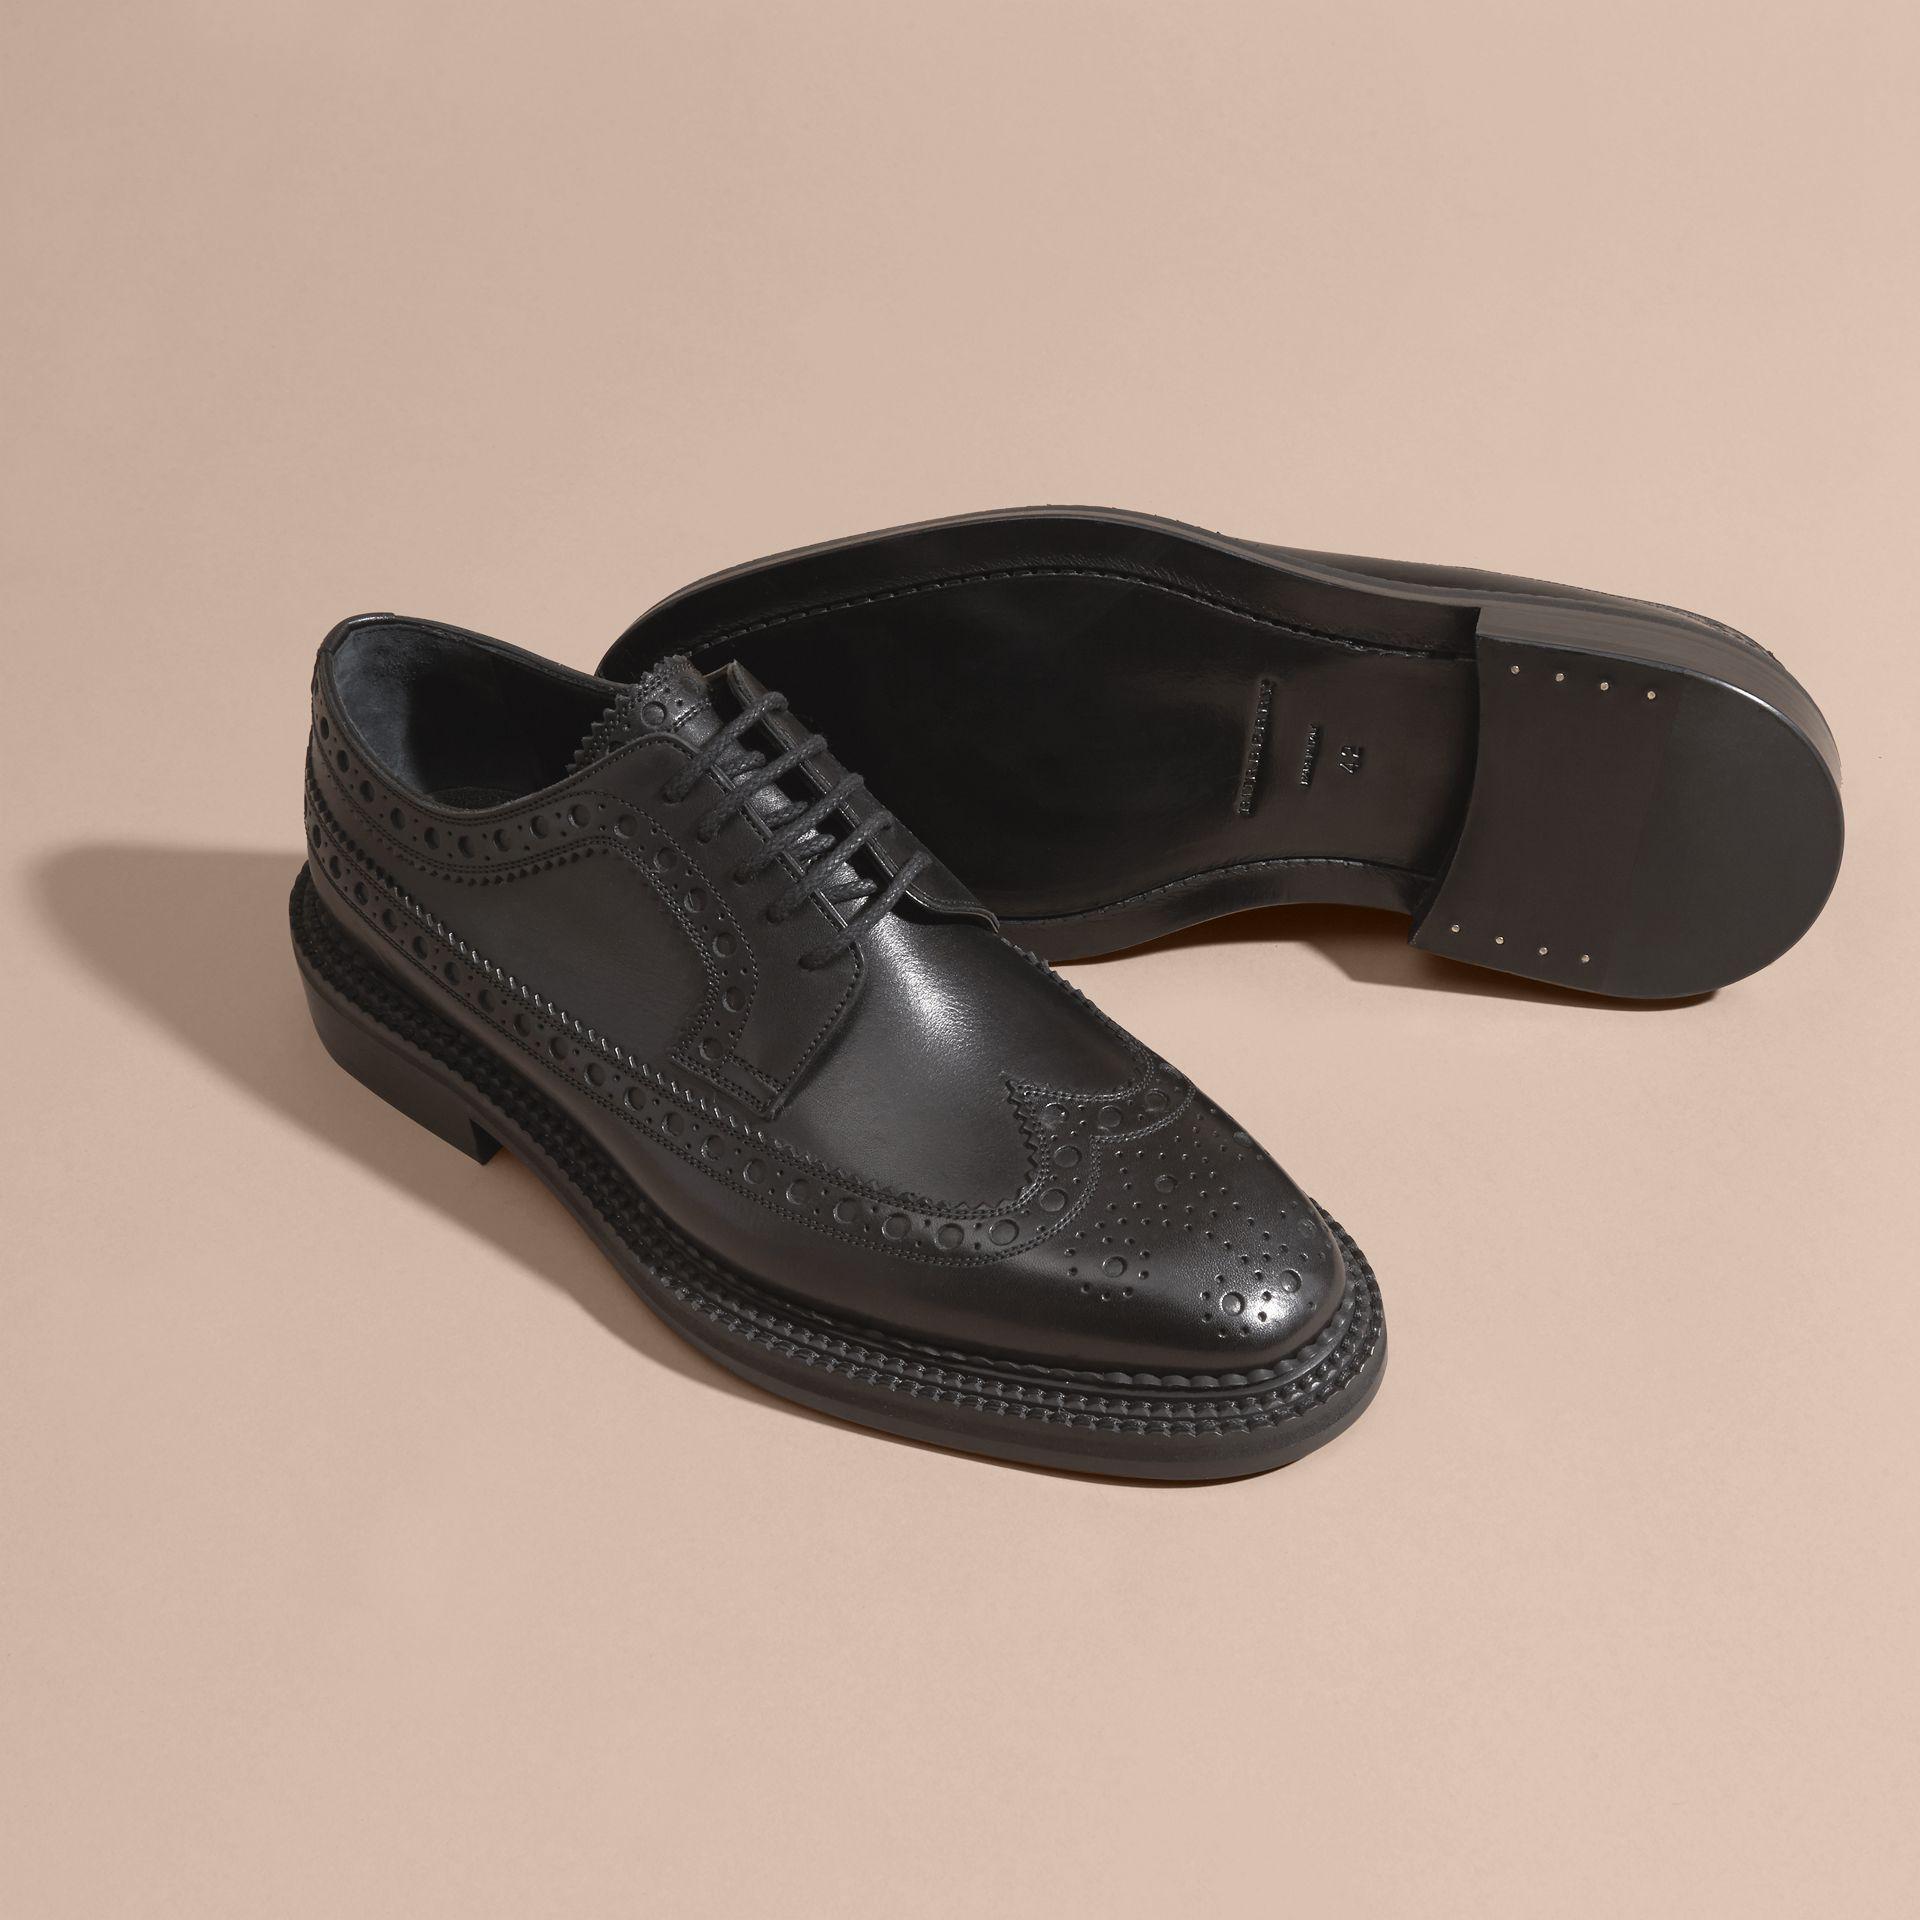 Burberry Leather Wingtip Brogues in 